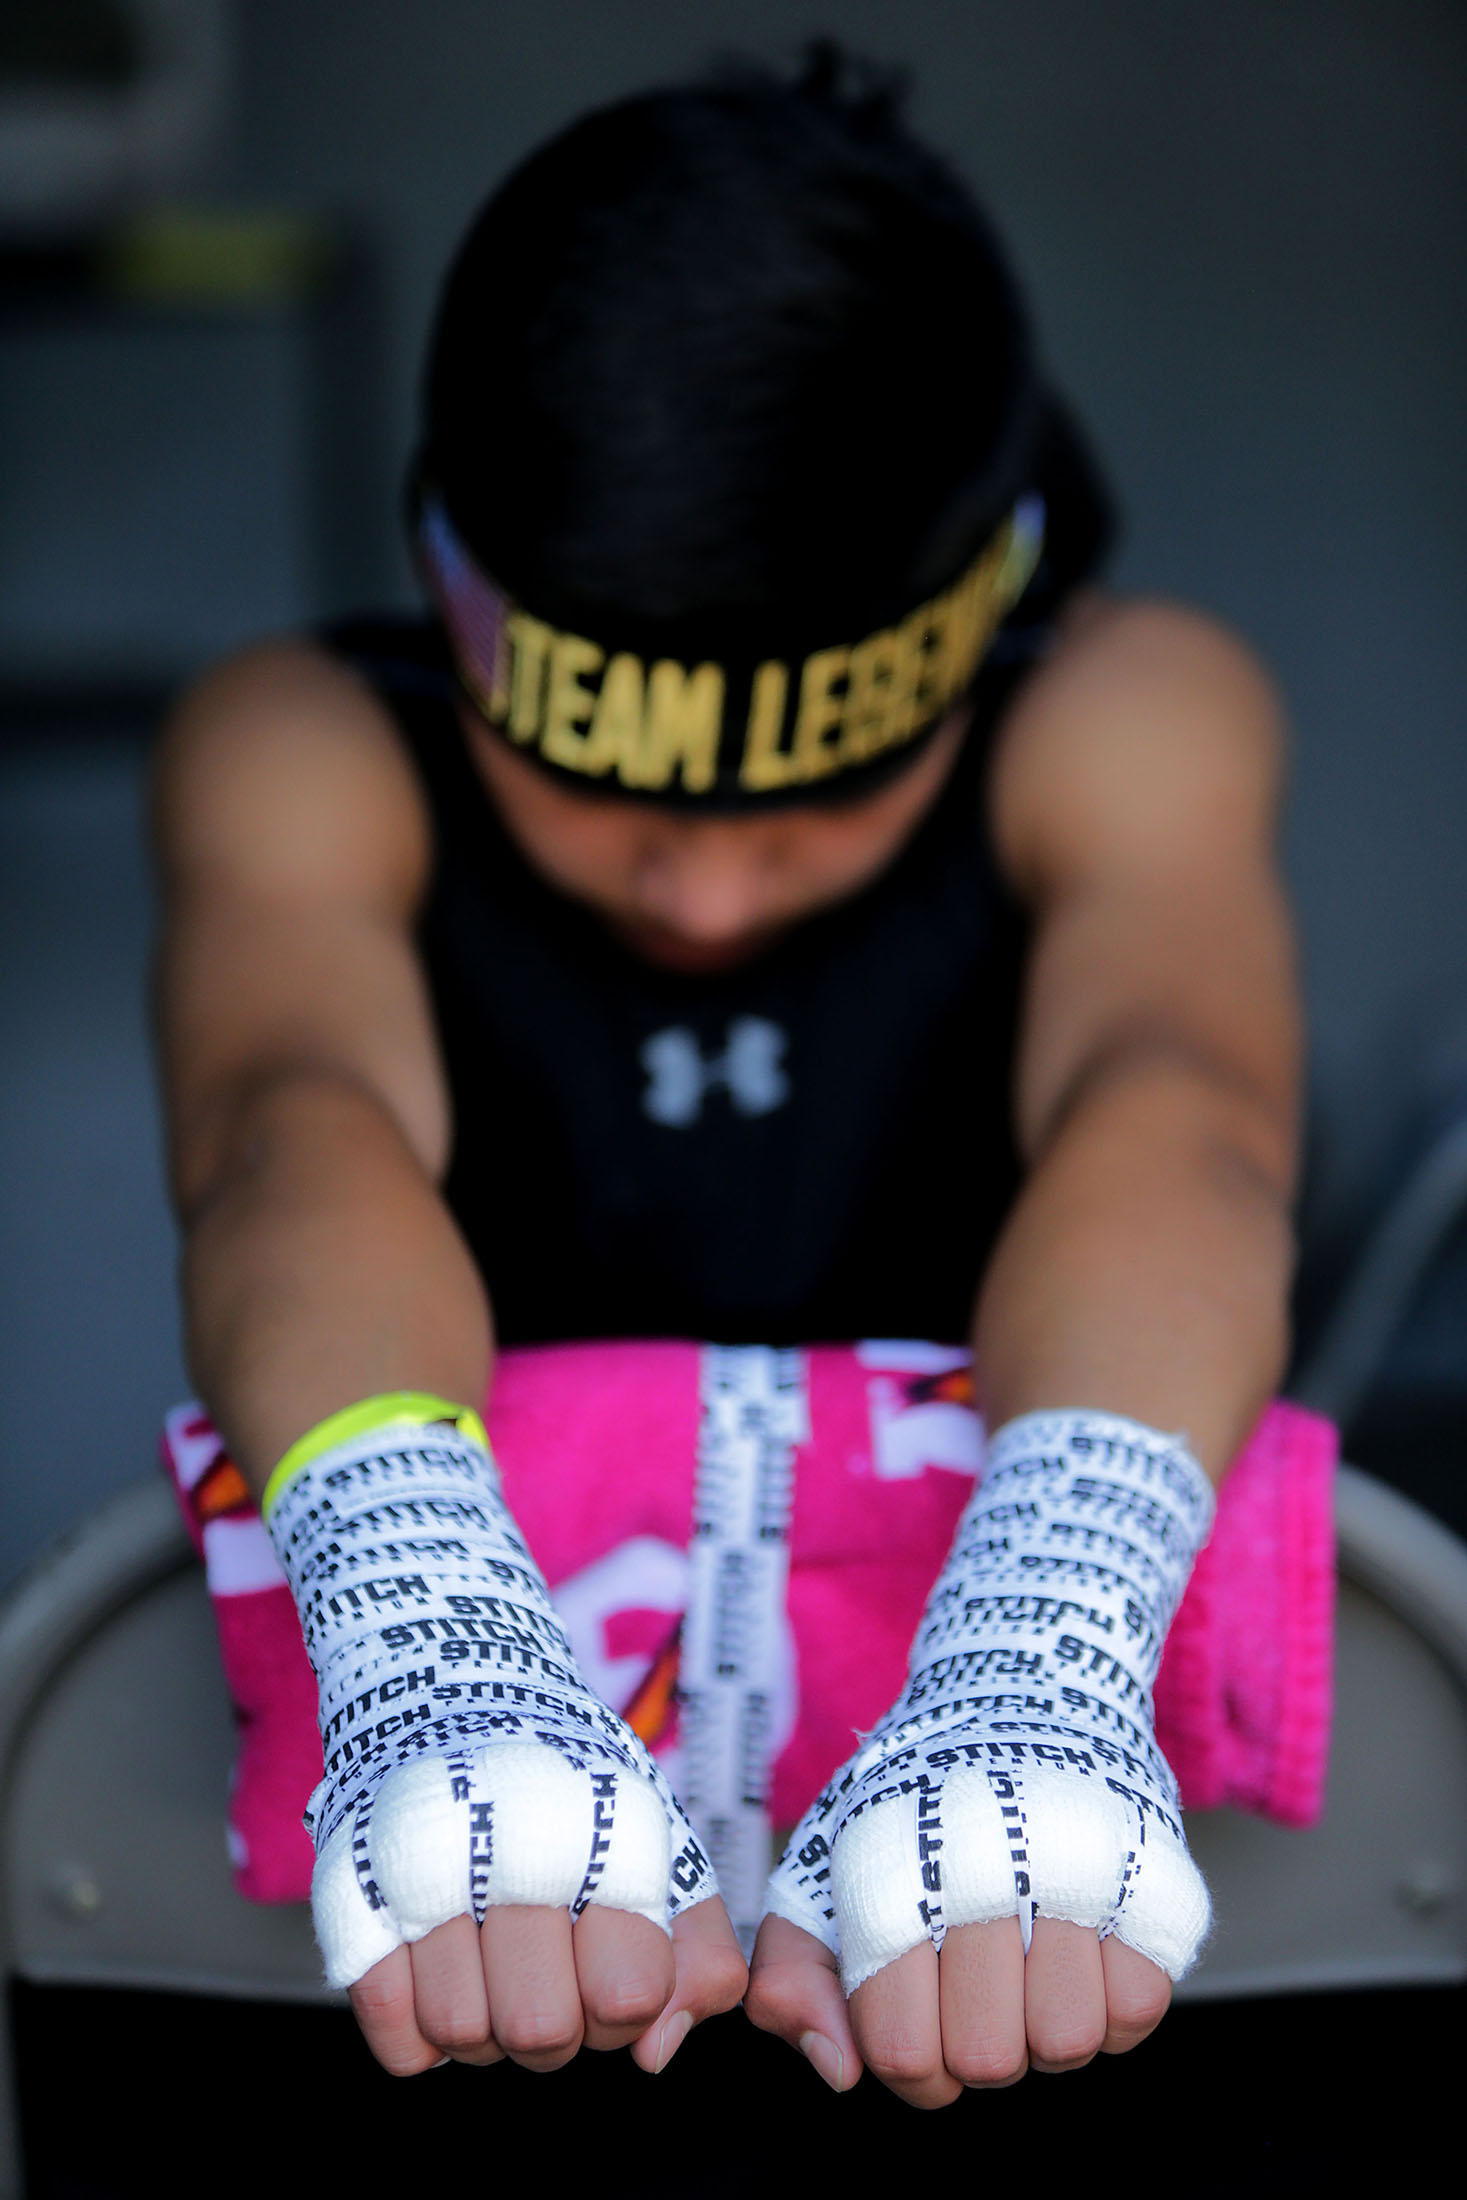  Team Legendz Boxing Club's Jonathan Trevino, 12, of San Jose takes a moment to get his mind set ready is for the first bout of the day during the Future Olympics Champions at  Lake Perris Sports Pavilion in Perris on Saturday, August 18, 2018.   